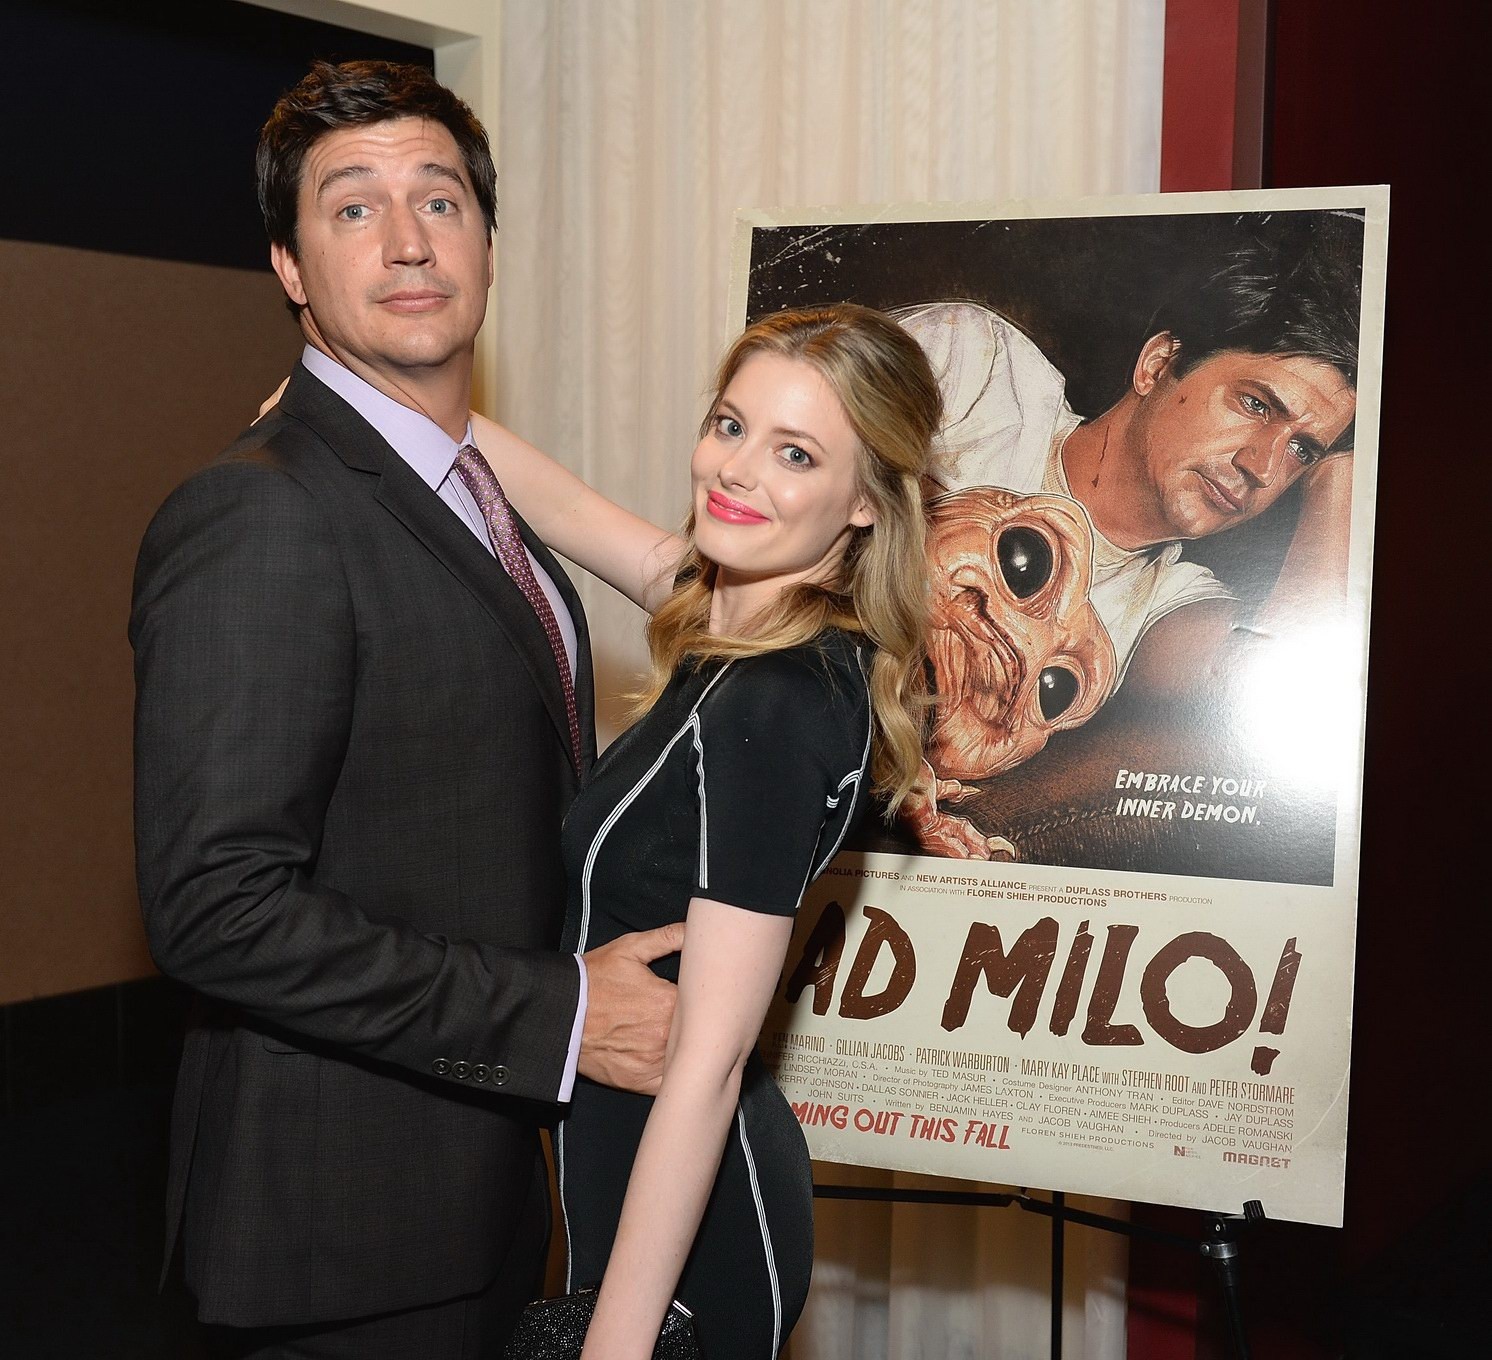 Gillian Jacobs see through to bra at the 'Bad Milo' premiere in Hollywood #75220132